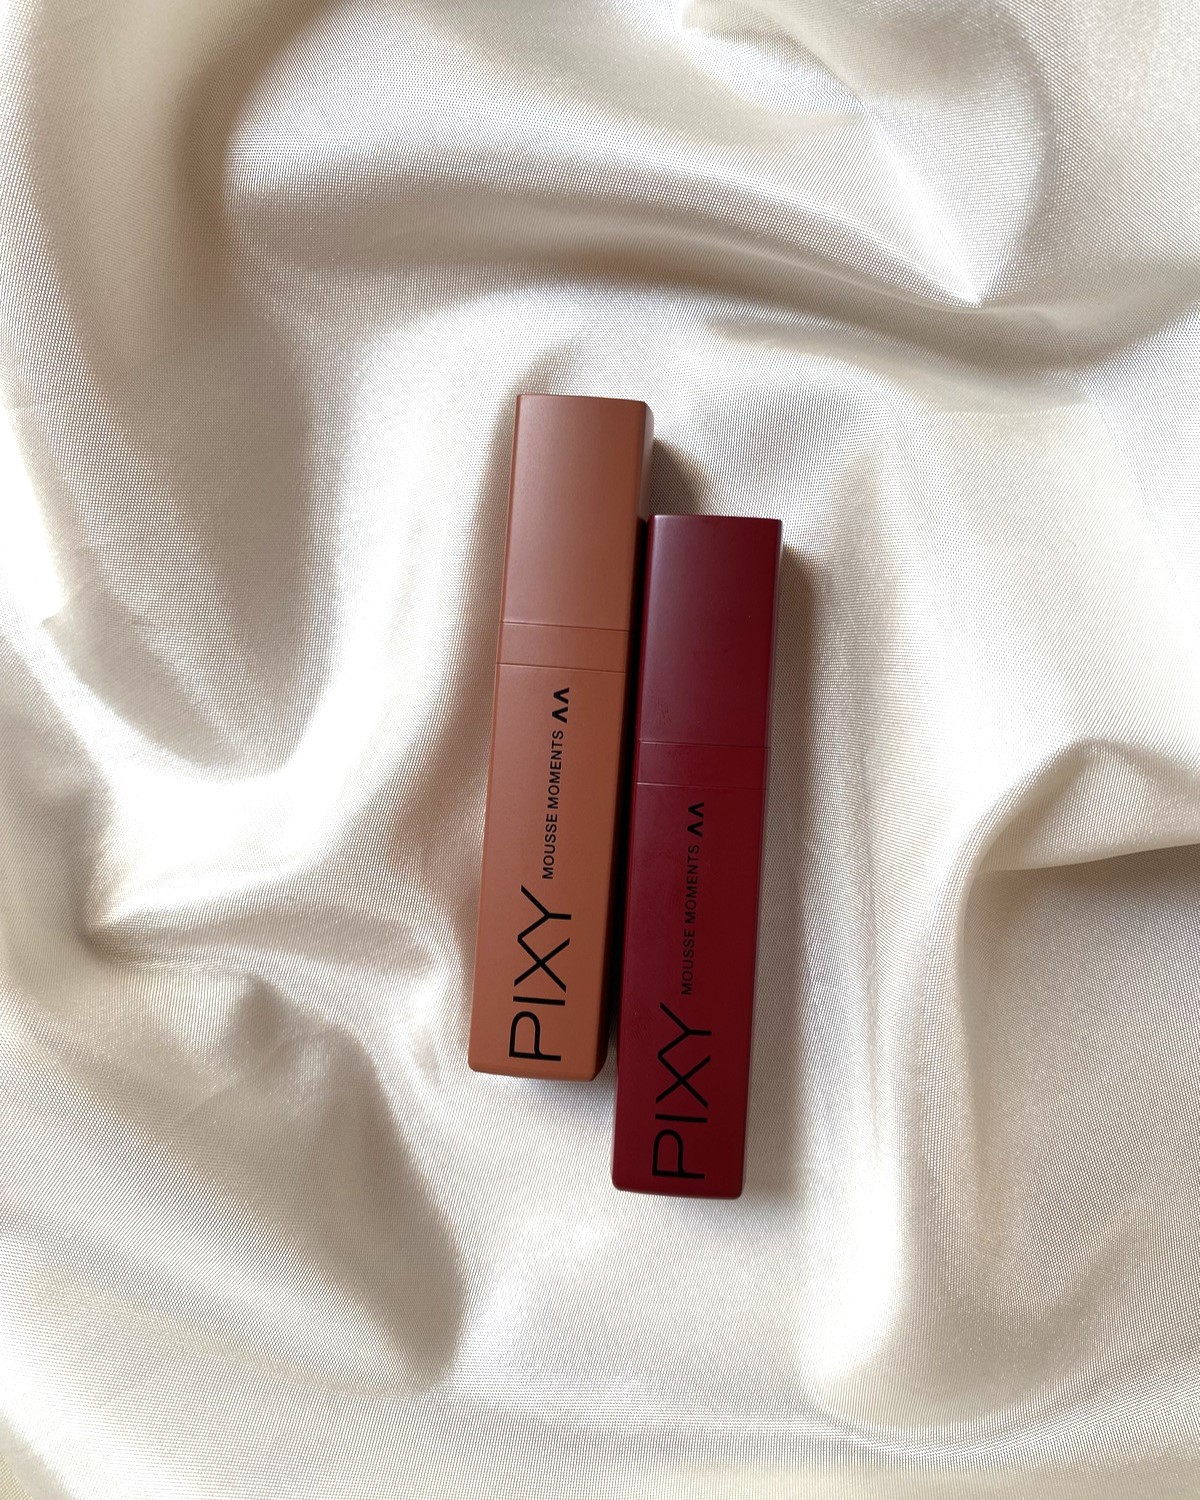 Review PIXY Mousse Moment No 2 Bussiest Maroon & No 5 Peacefully Brown